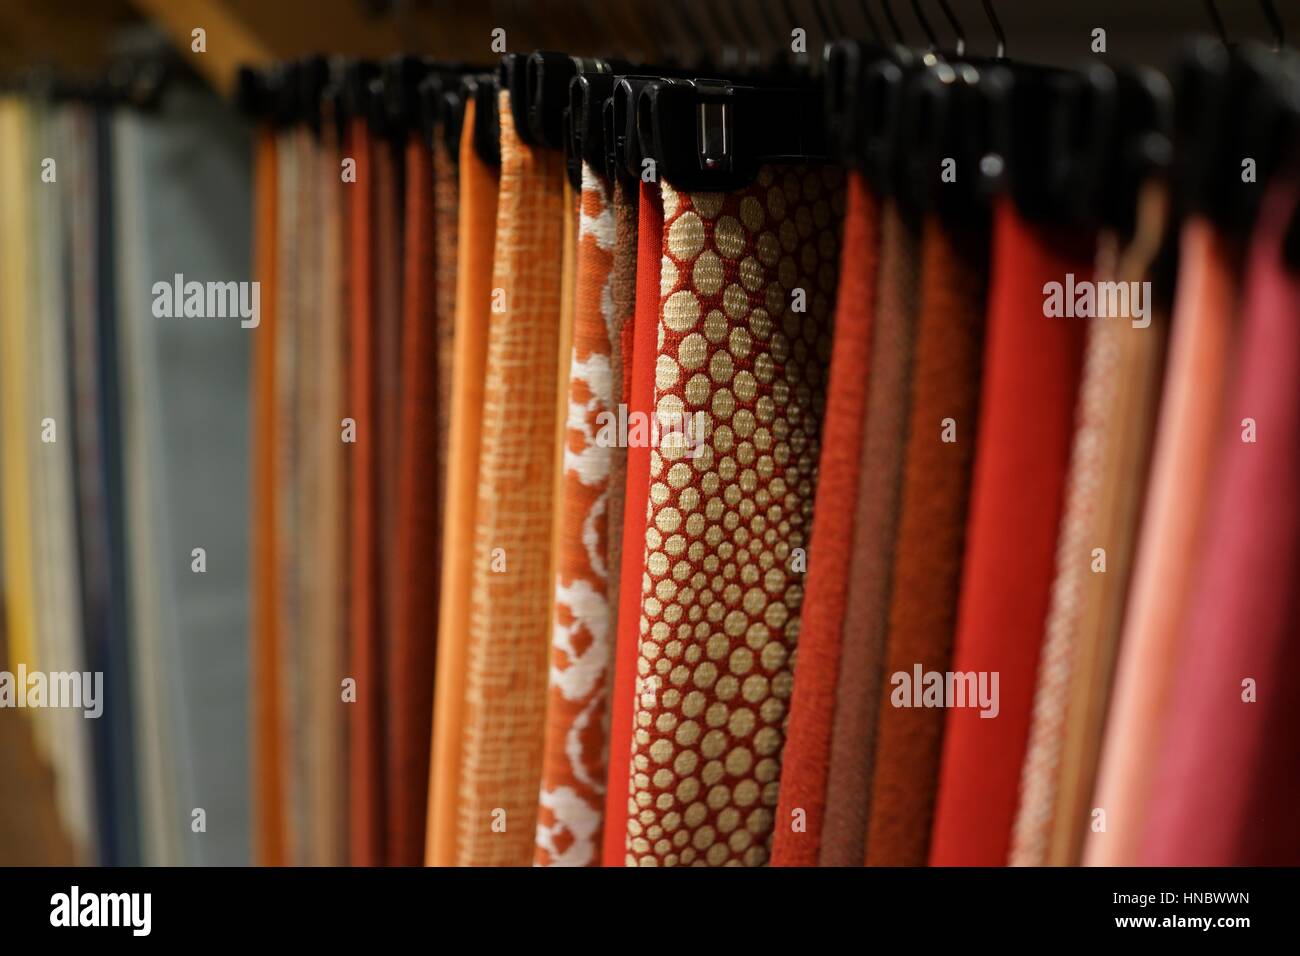 A rack of  patterned upholstery fabric samples hung closely together on black plastic hangers, solid colors and patterns, reds, pink, ochre, blue hues Stock Photo